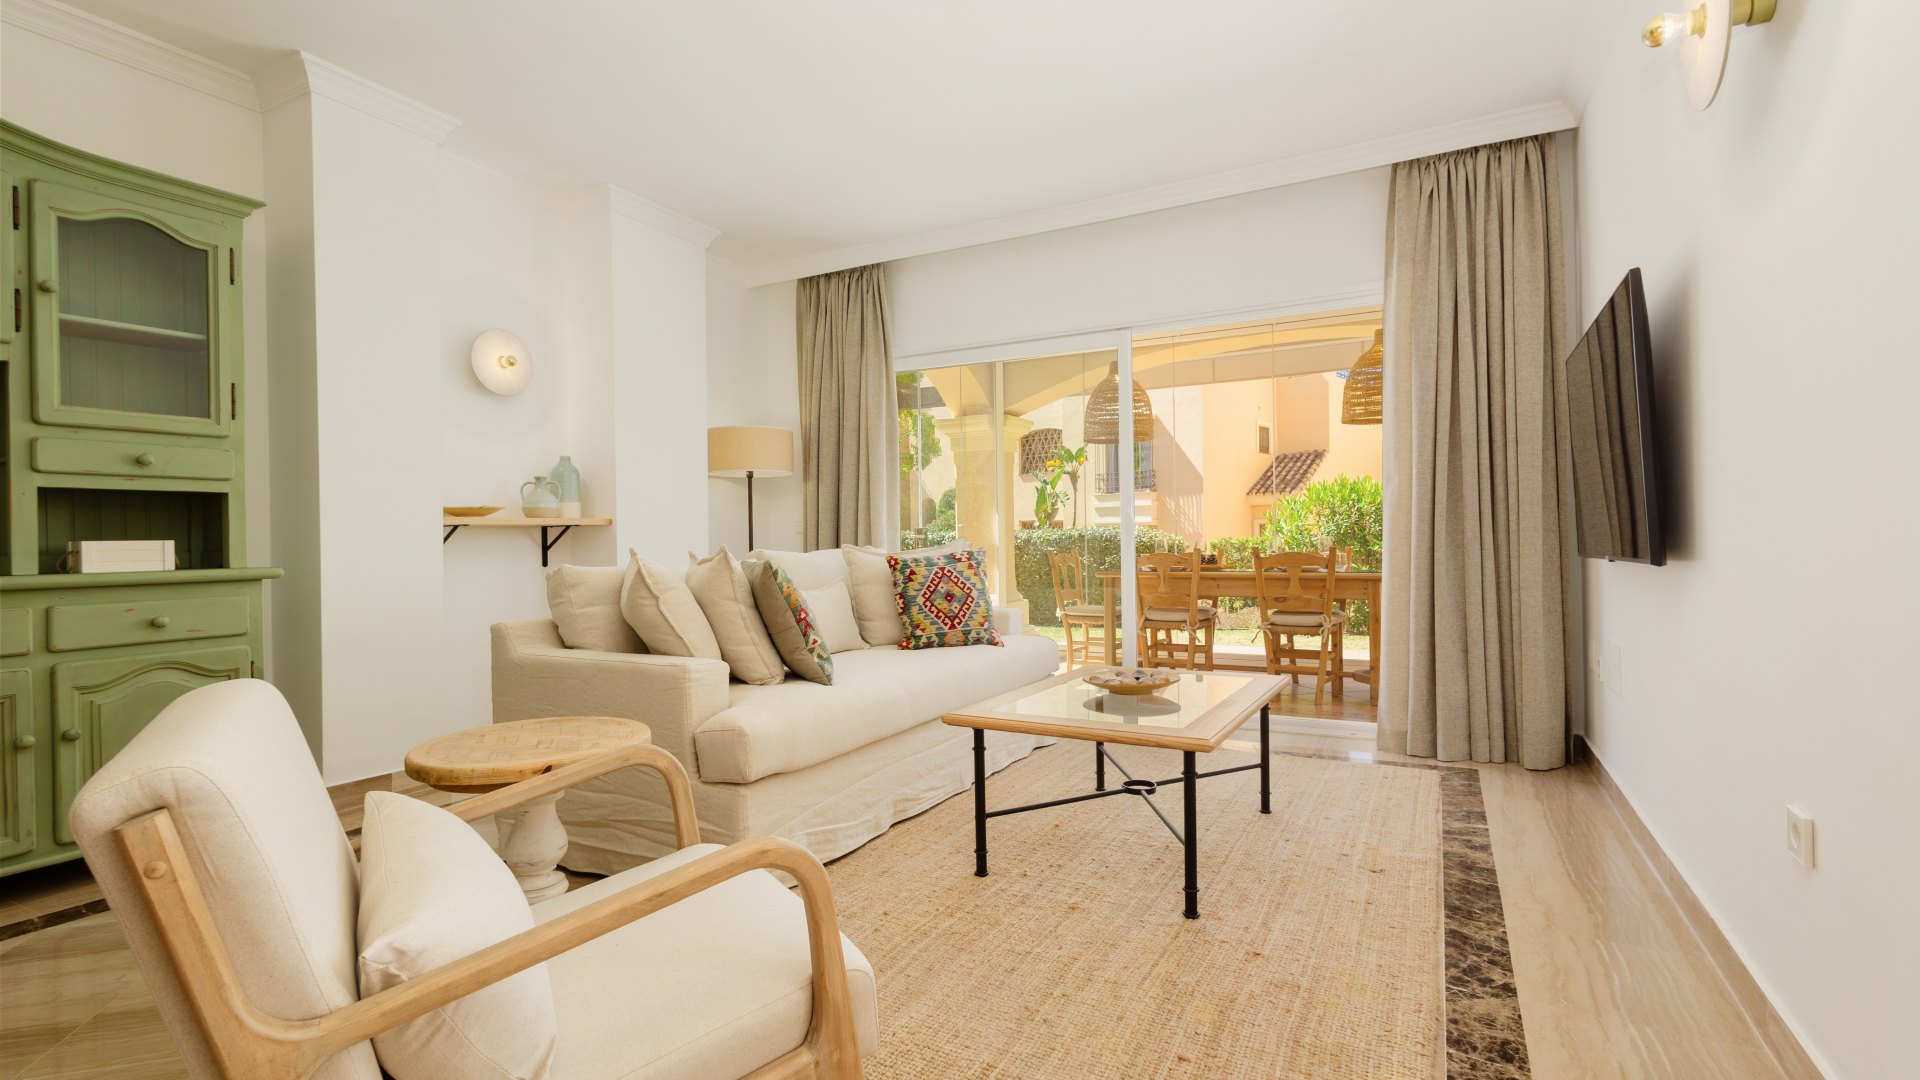 Newly renovated apartment with large glazed terrace, close to the beach in Elviria, Marbella.